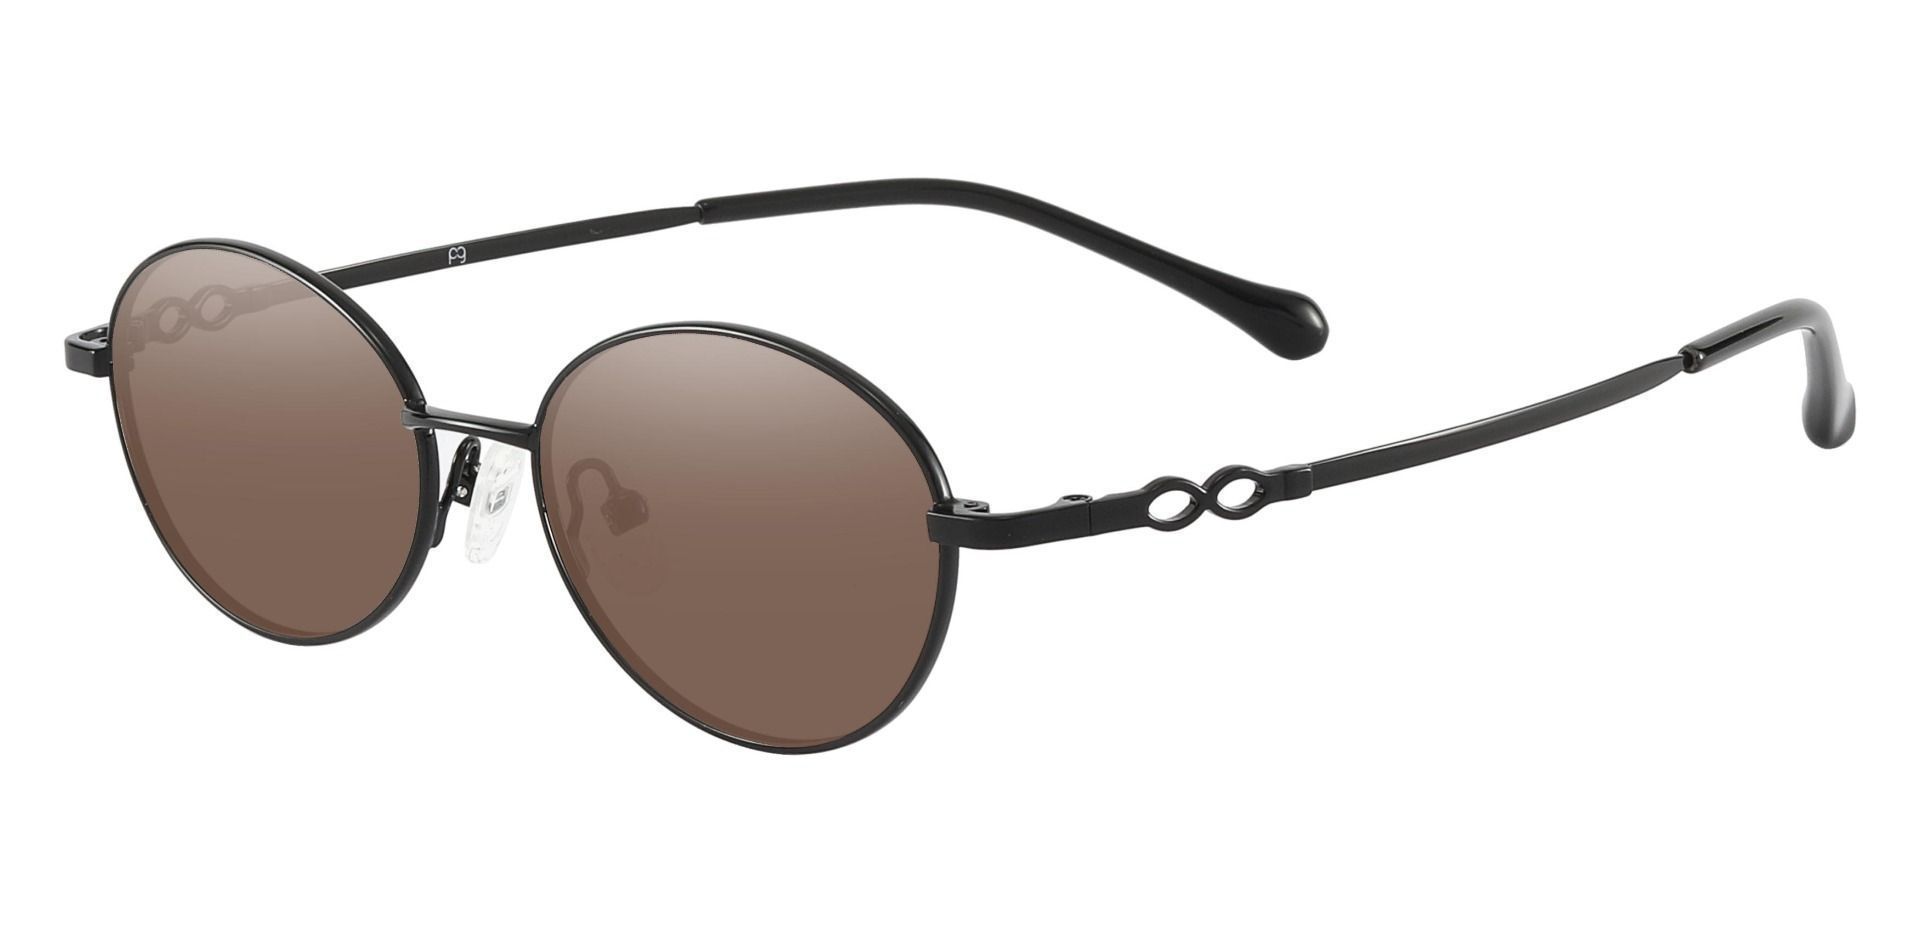 Odyssey Oval Reading Sunglasses - Black Frame With Brown Lenses